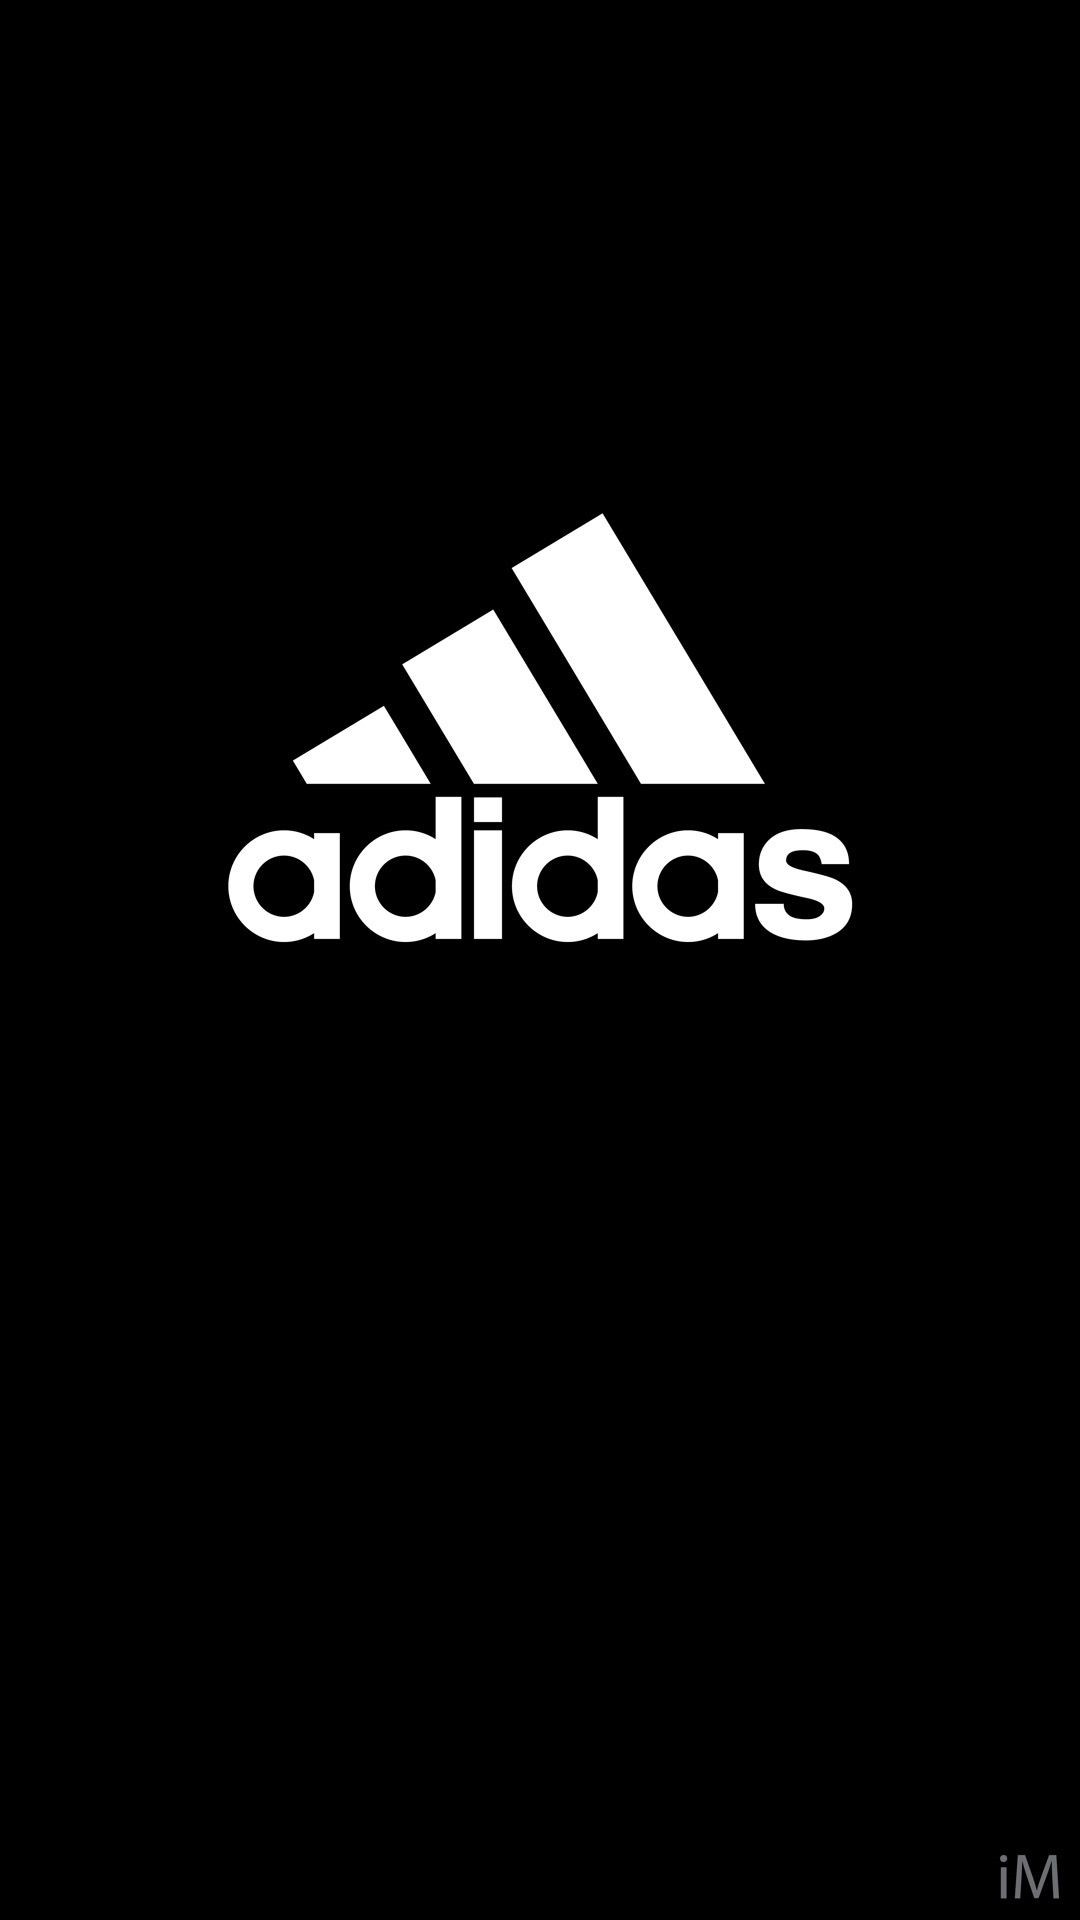 Black Adidas wallpaper for iPhone